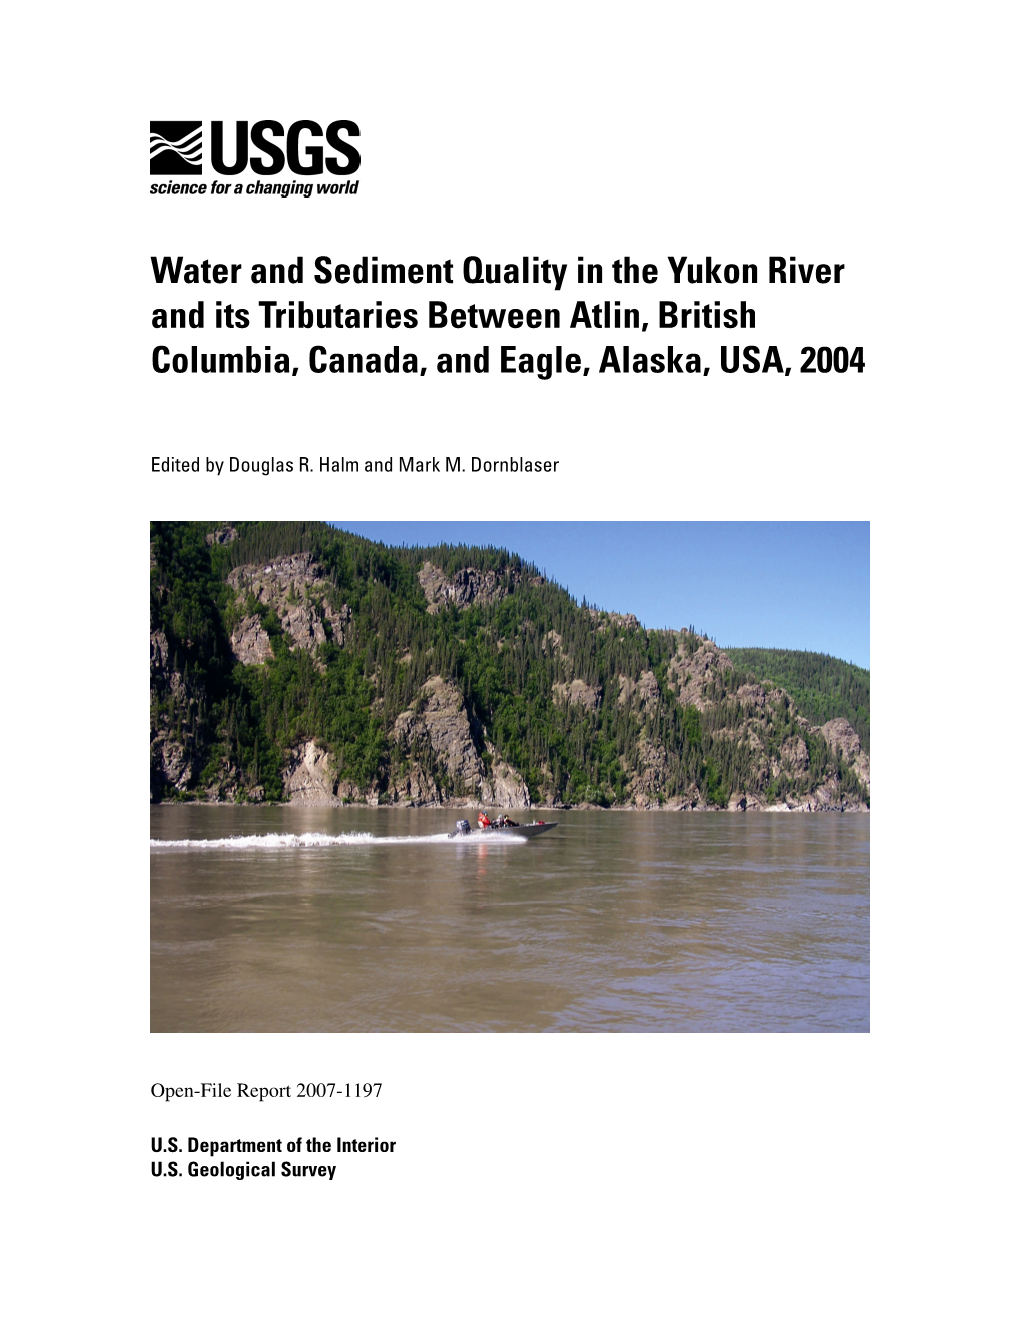 Water and Sediment Quality in the Yukon River and Its Tributaries Between Atlin, British Columbia, Canada, and Eagle, Alaska, USA, 2004